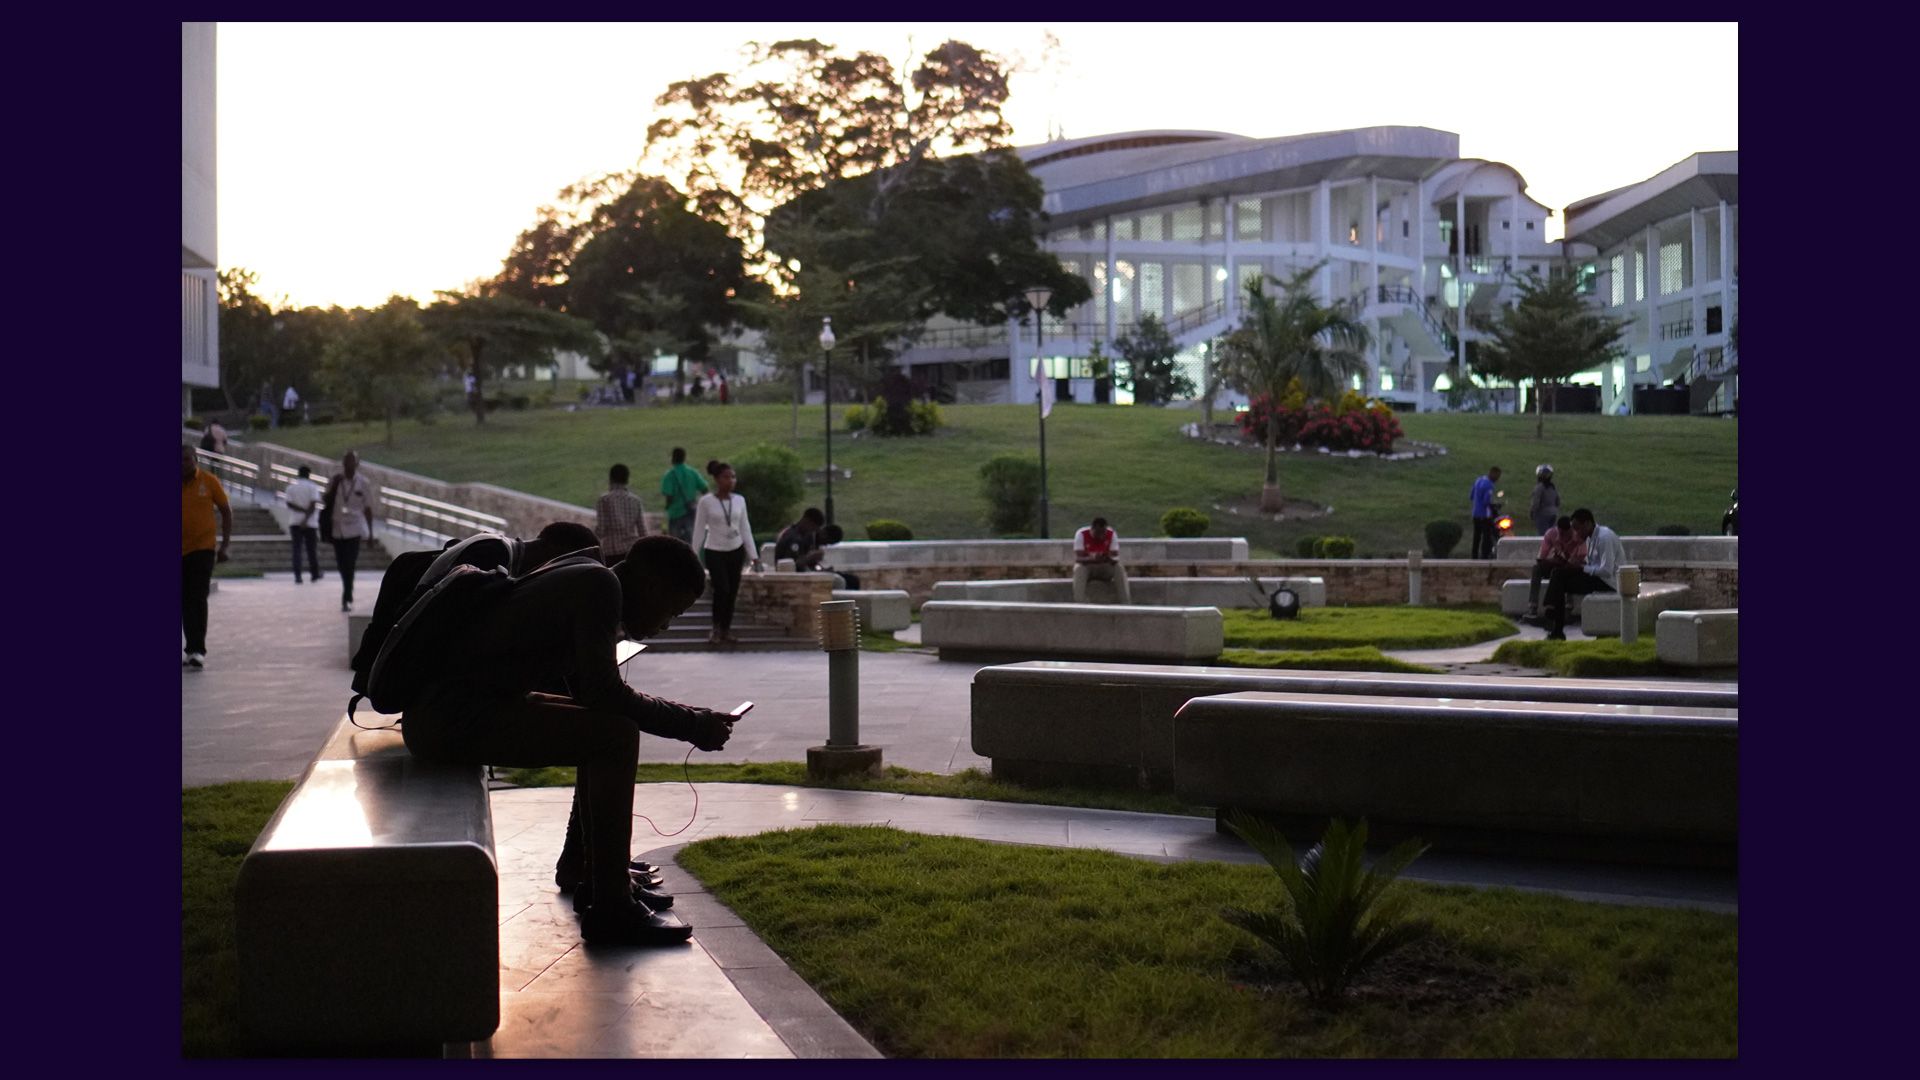 Students relax outside the library at Dar es Salaam University.